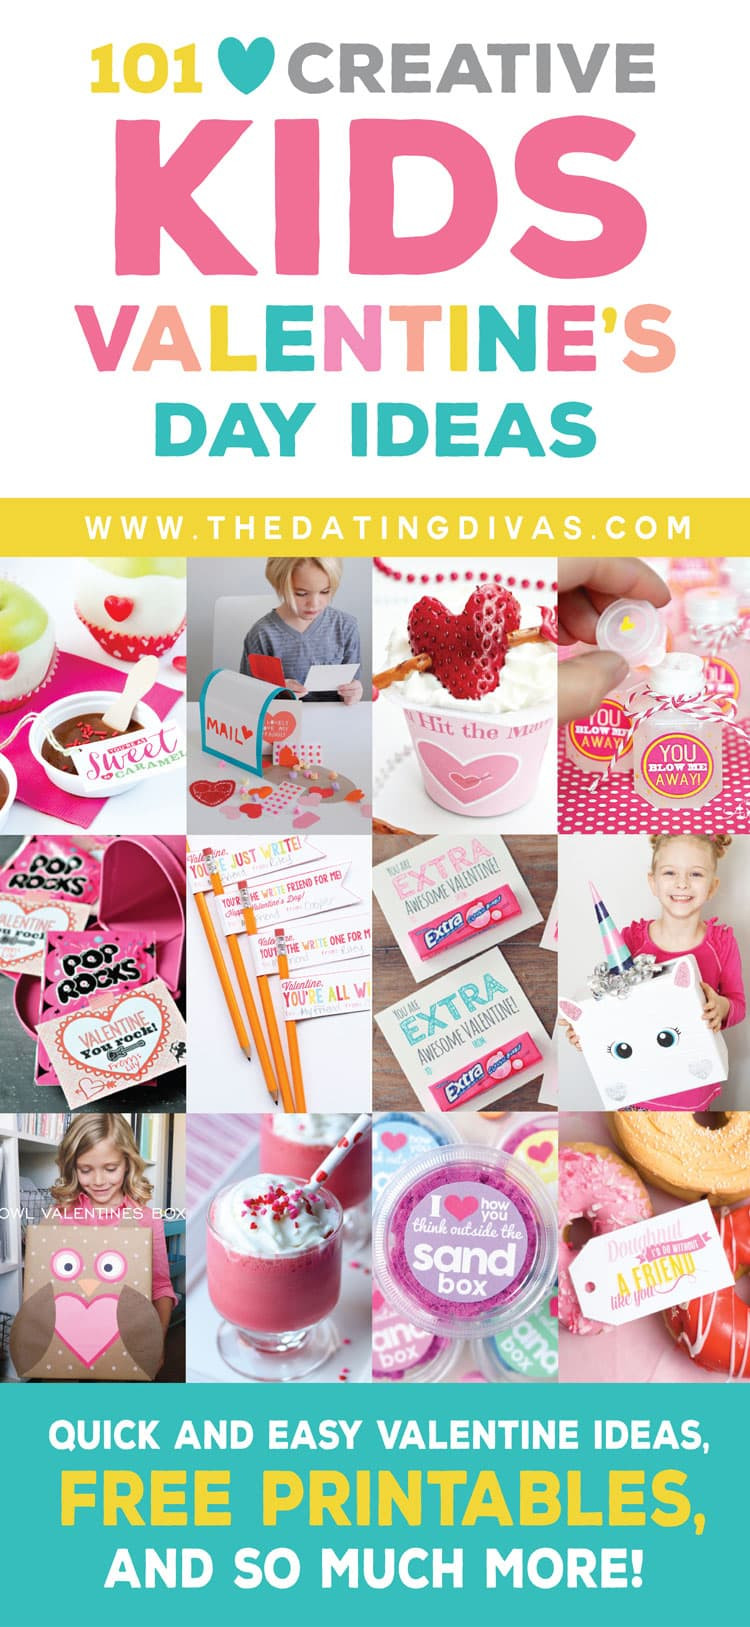 Valentines Gift Ideas For Toddlers
 Kids Valentine s Day Ideas From The Dating Divas